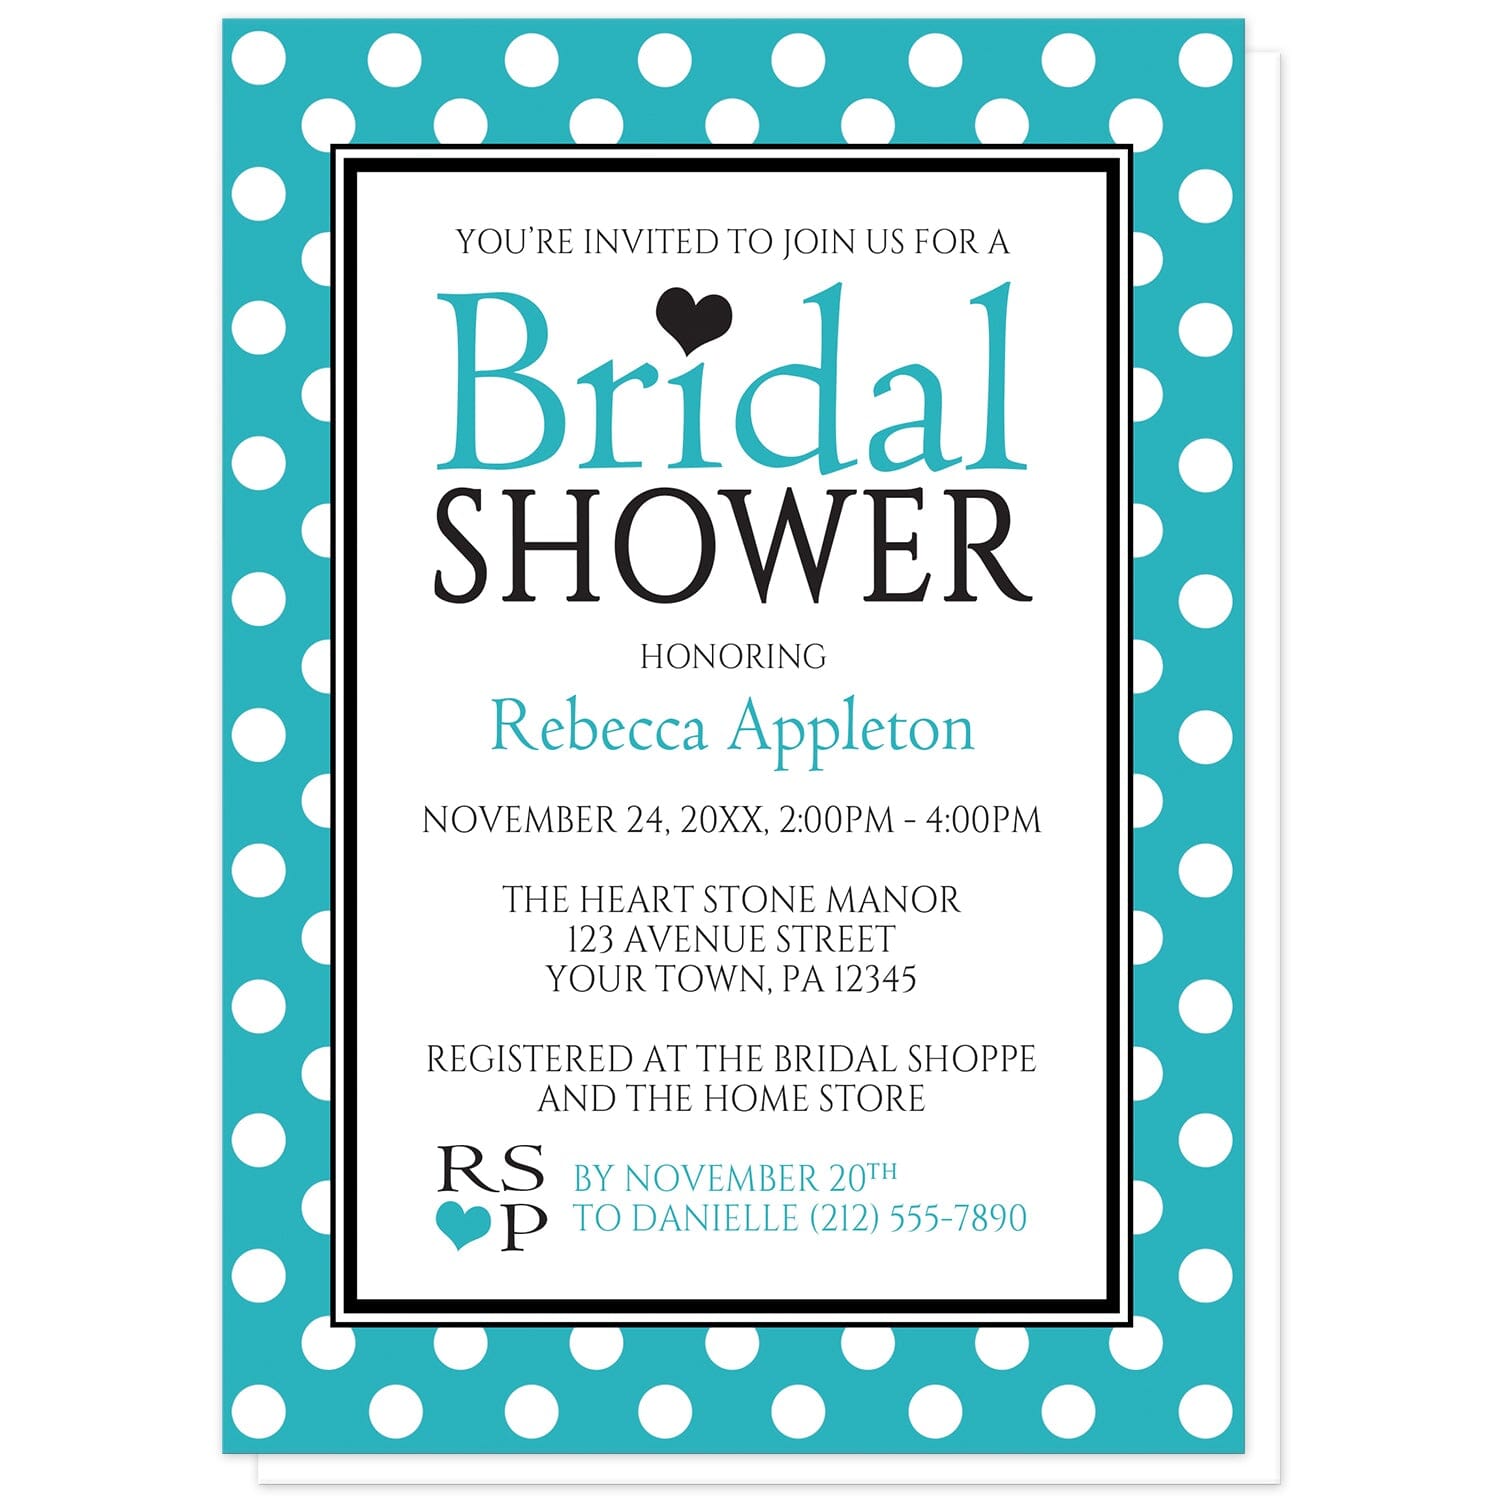 Polka Dot Turquoise Black and White Bridal Shower Invitations at Artistically Invited. Stylish polka dot turquoise black and white bridal shower invitations with your personalized bridal shower celebration details custom printed in turquoise and black inside a white rectangle outlined in black and white. The background design of these invitations is a white polka dots pattern over a bold turquoise color.